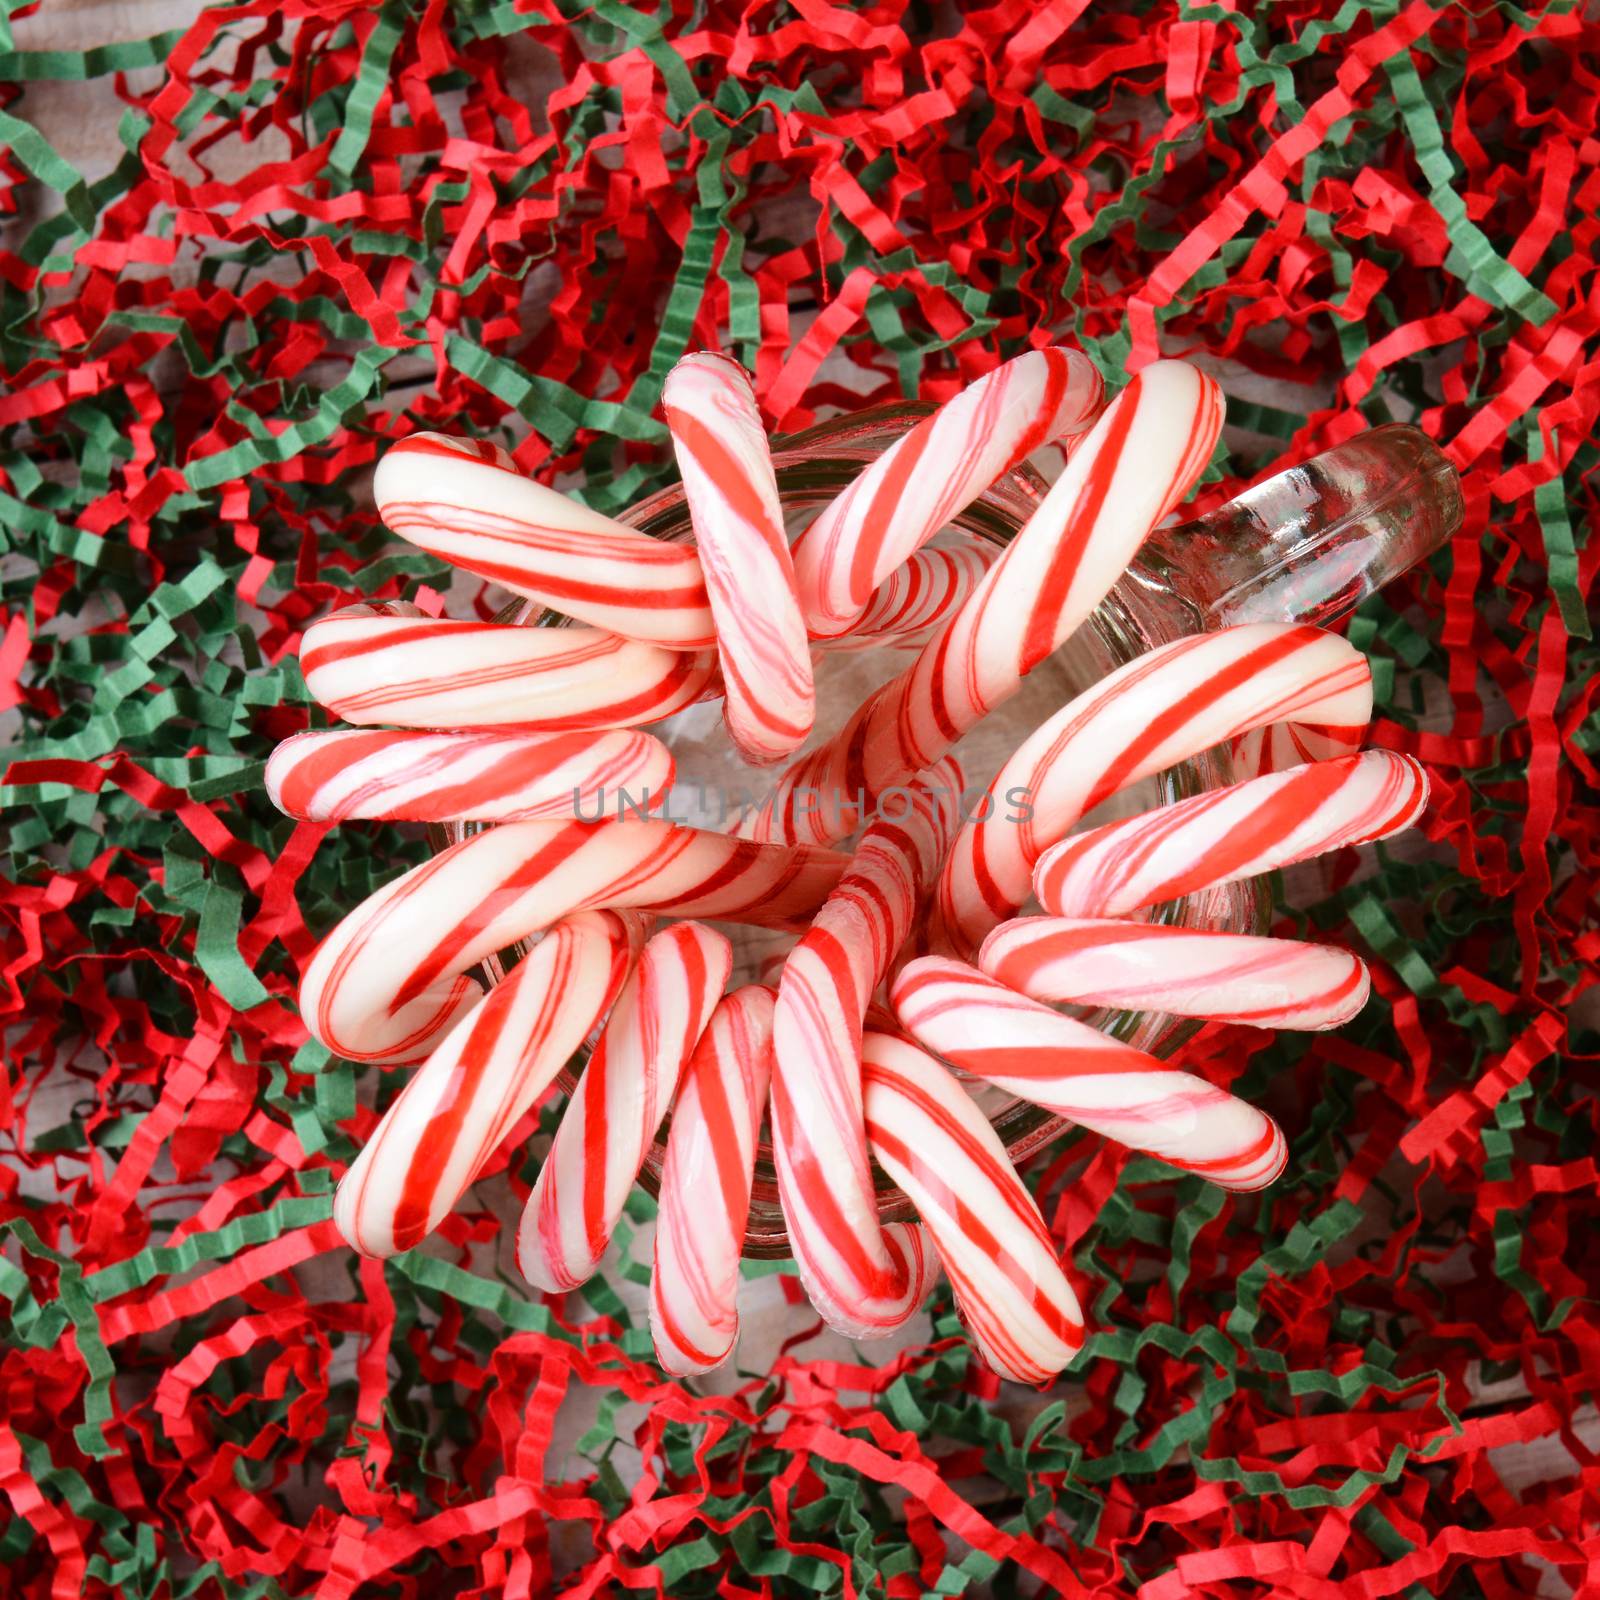 A high angle view of a glass jar full of candy canes. The jar is surrounded by shredded red and green crepe paper. Square Format.